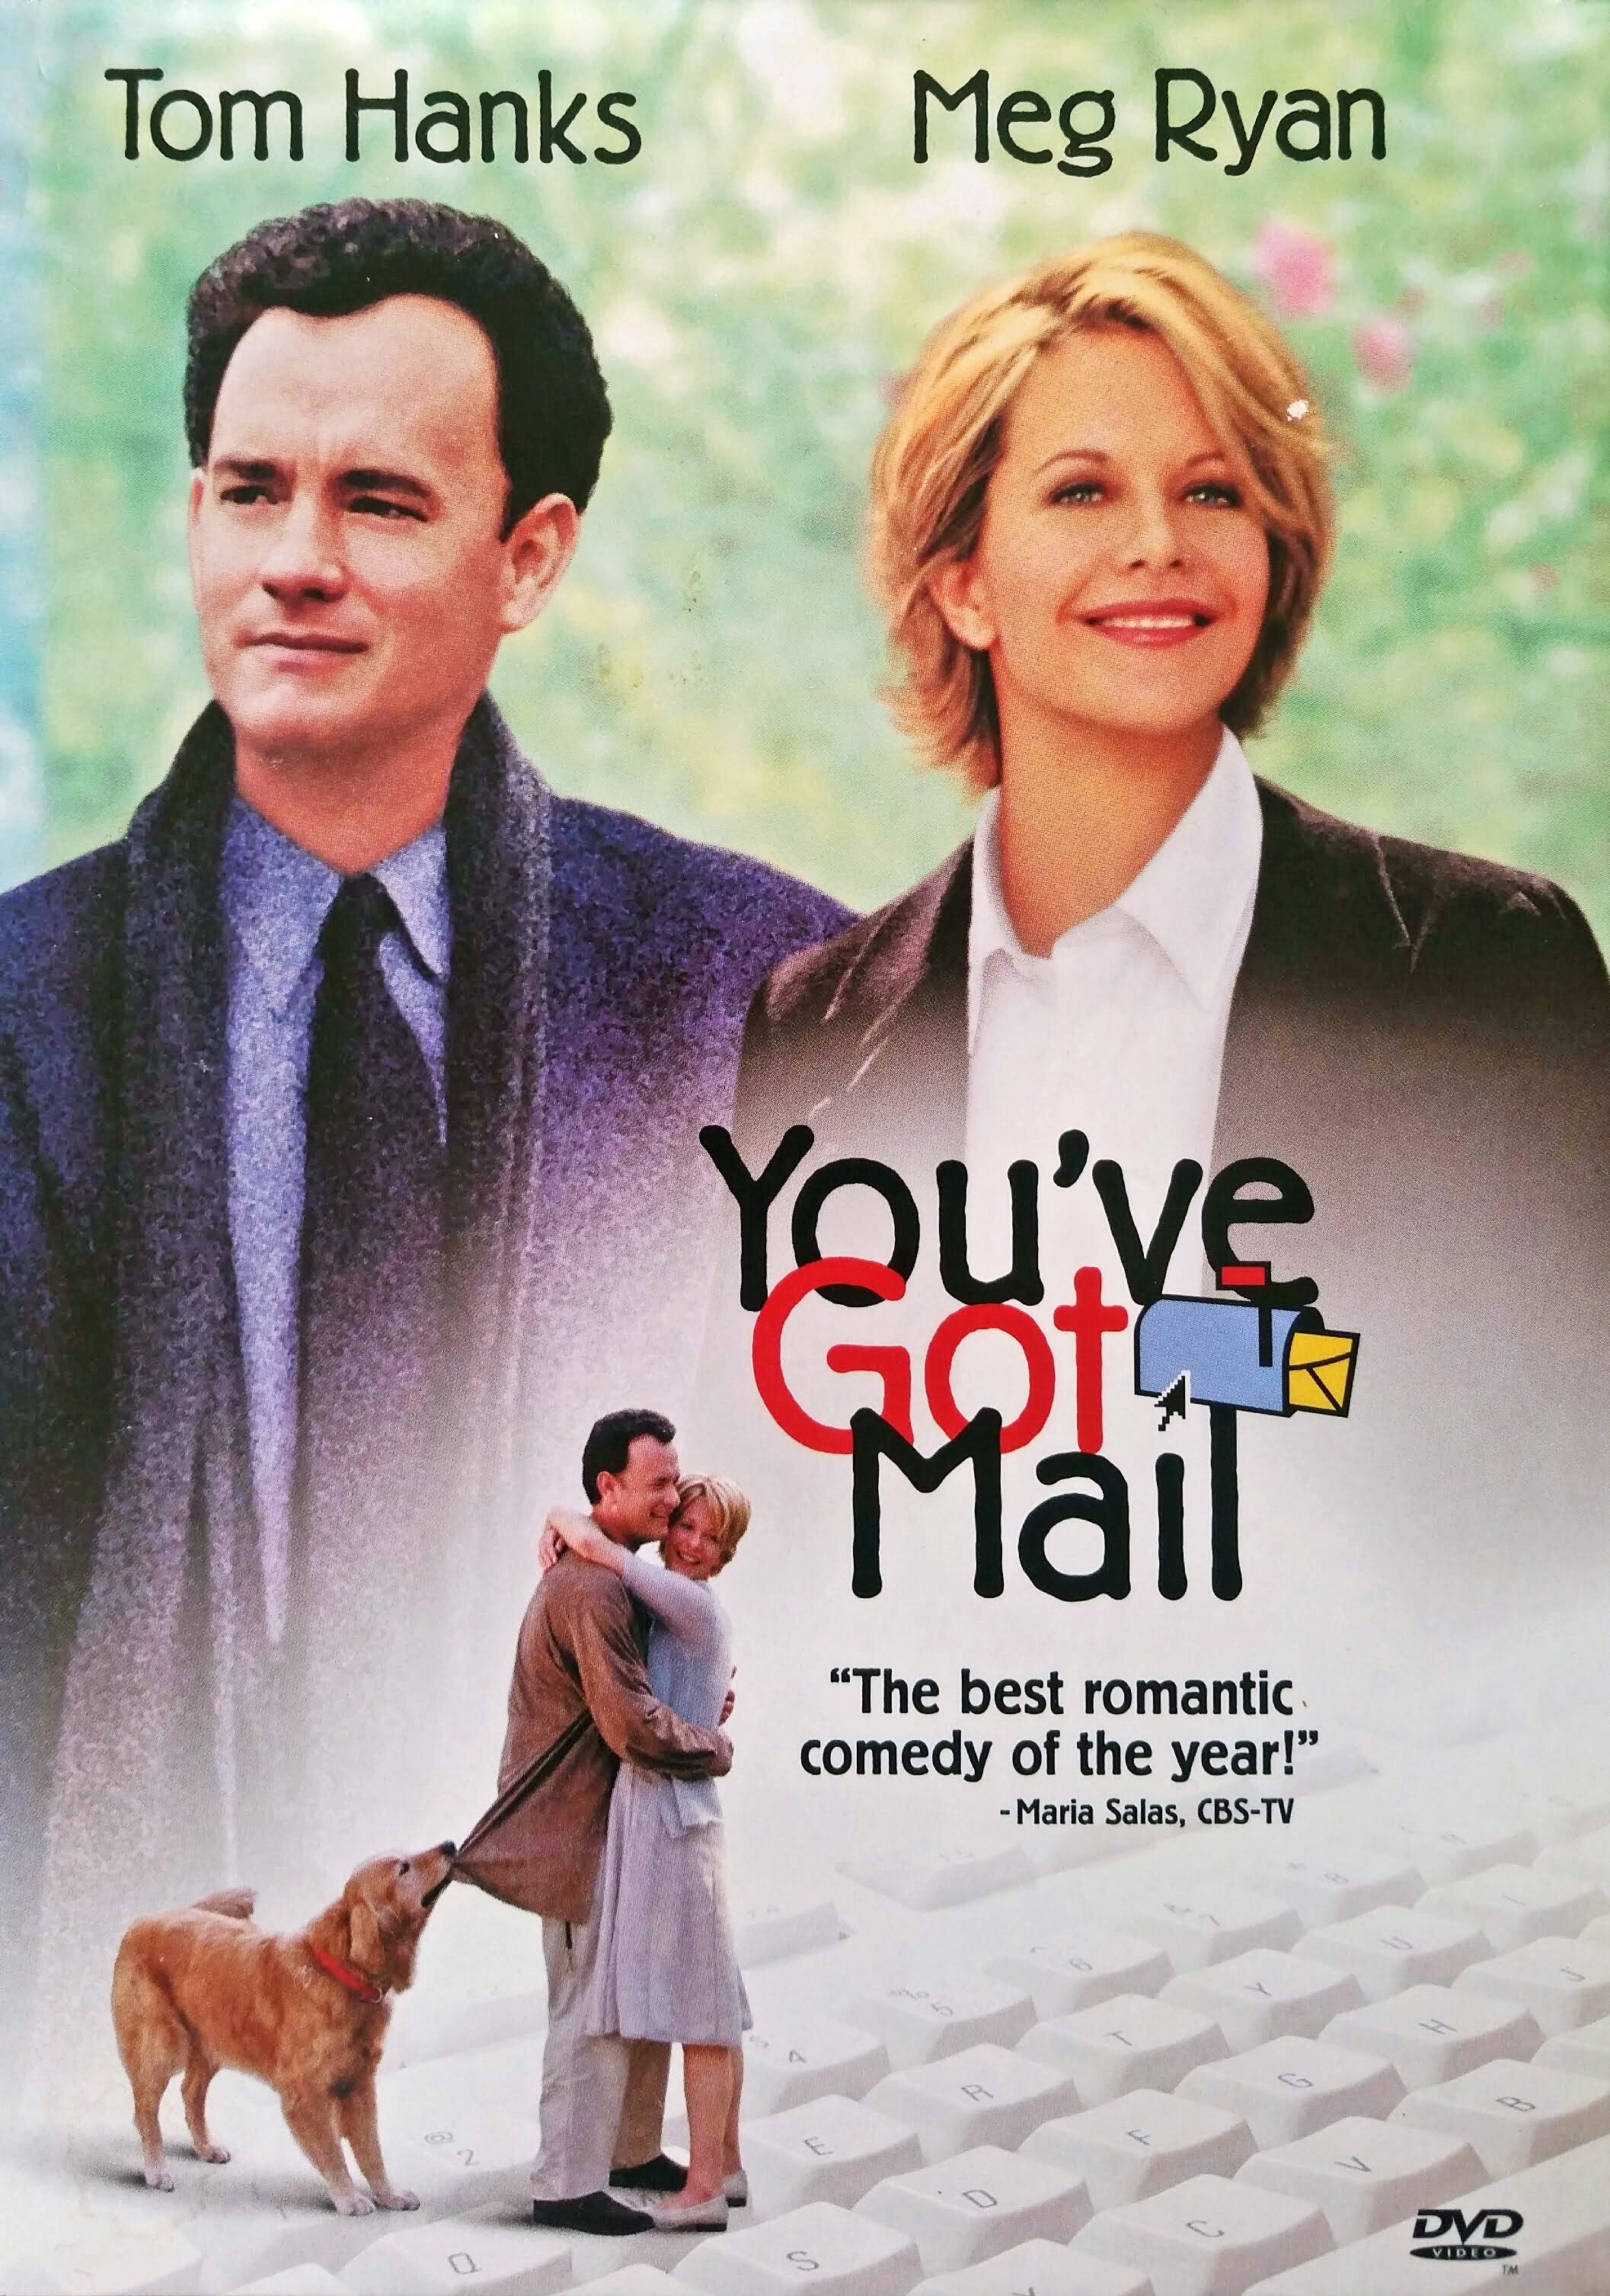 You've Got Mail DVD cover